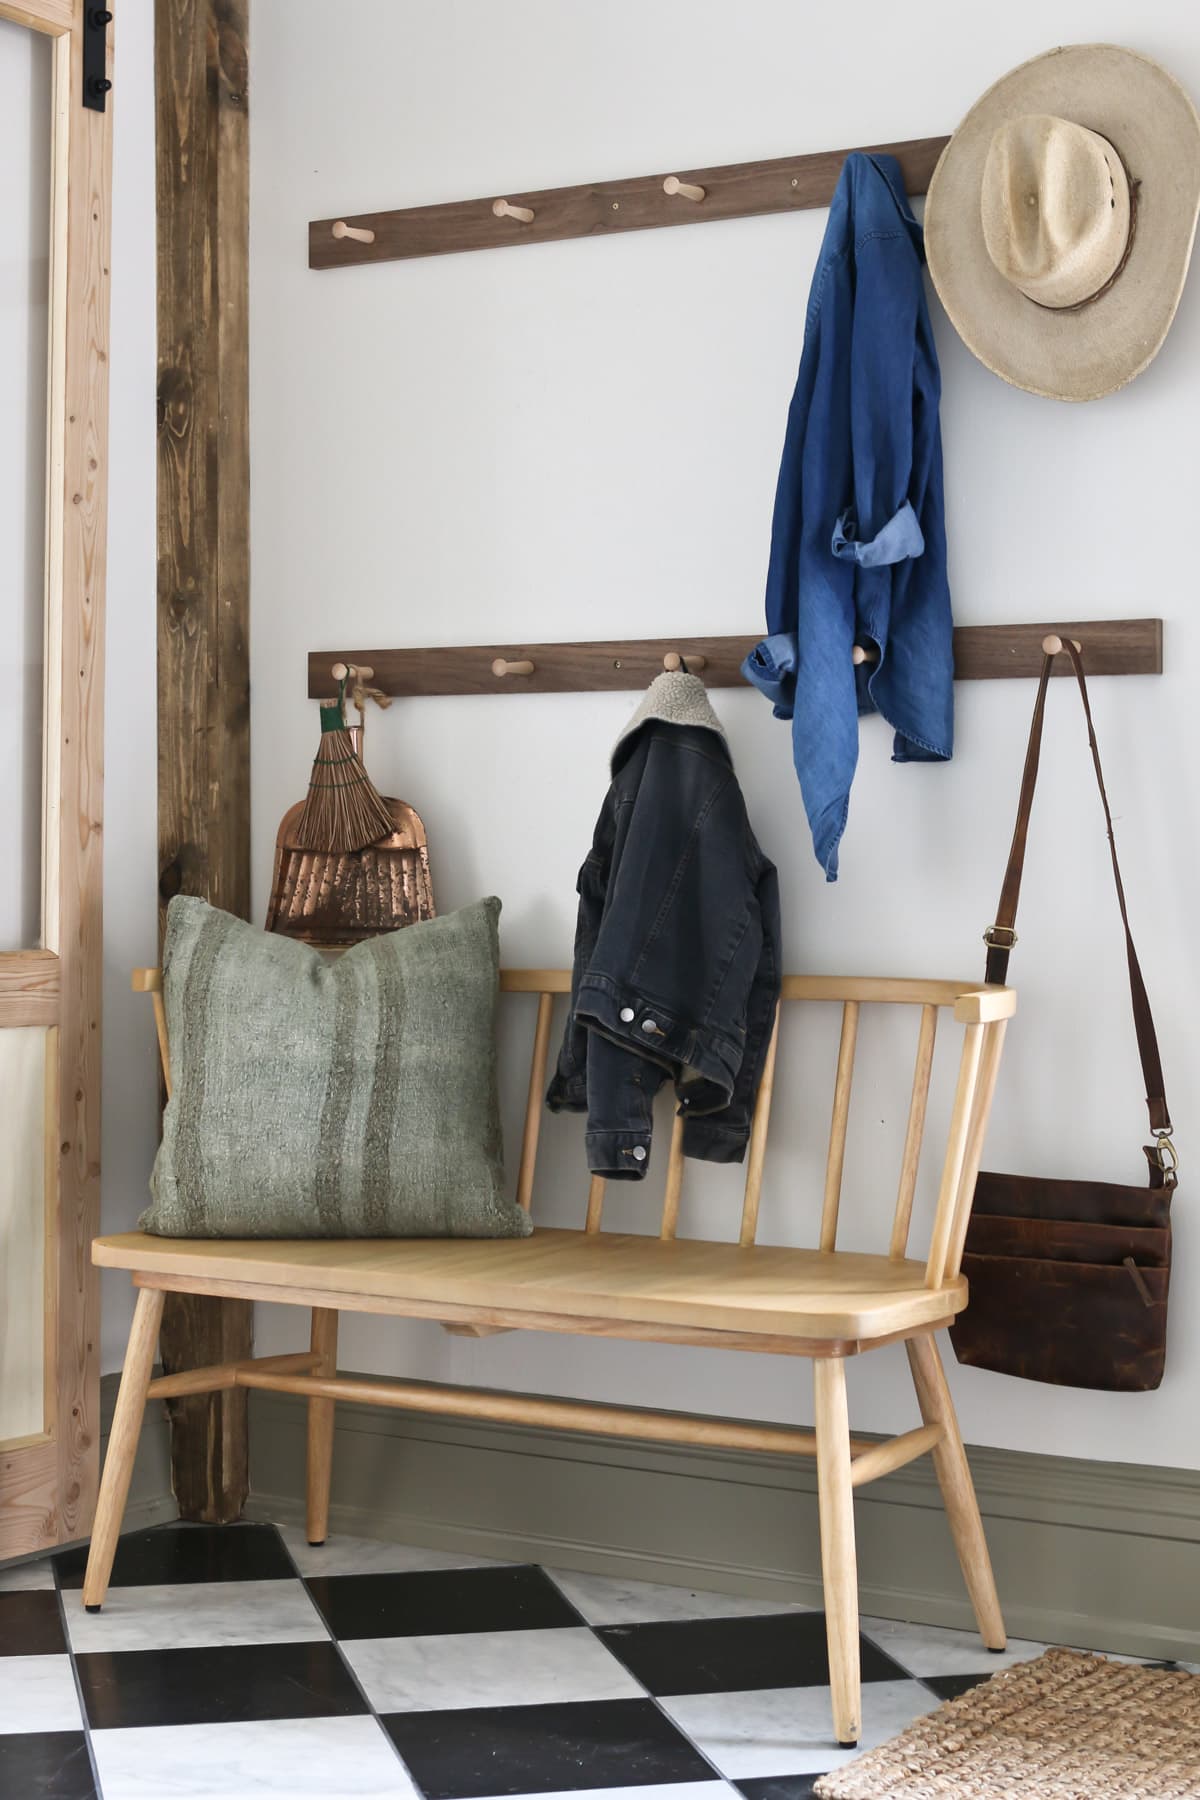 Bench in mudroom with shaker pegs